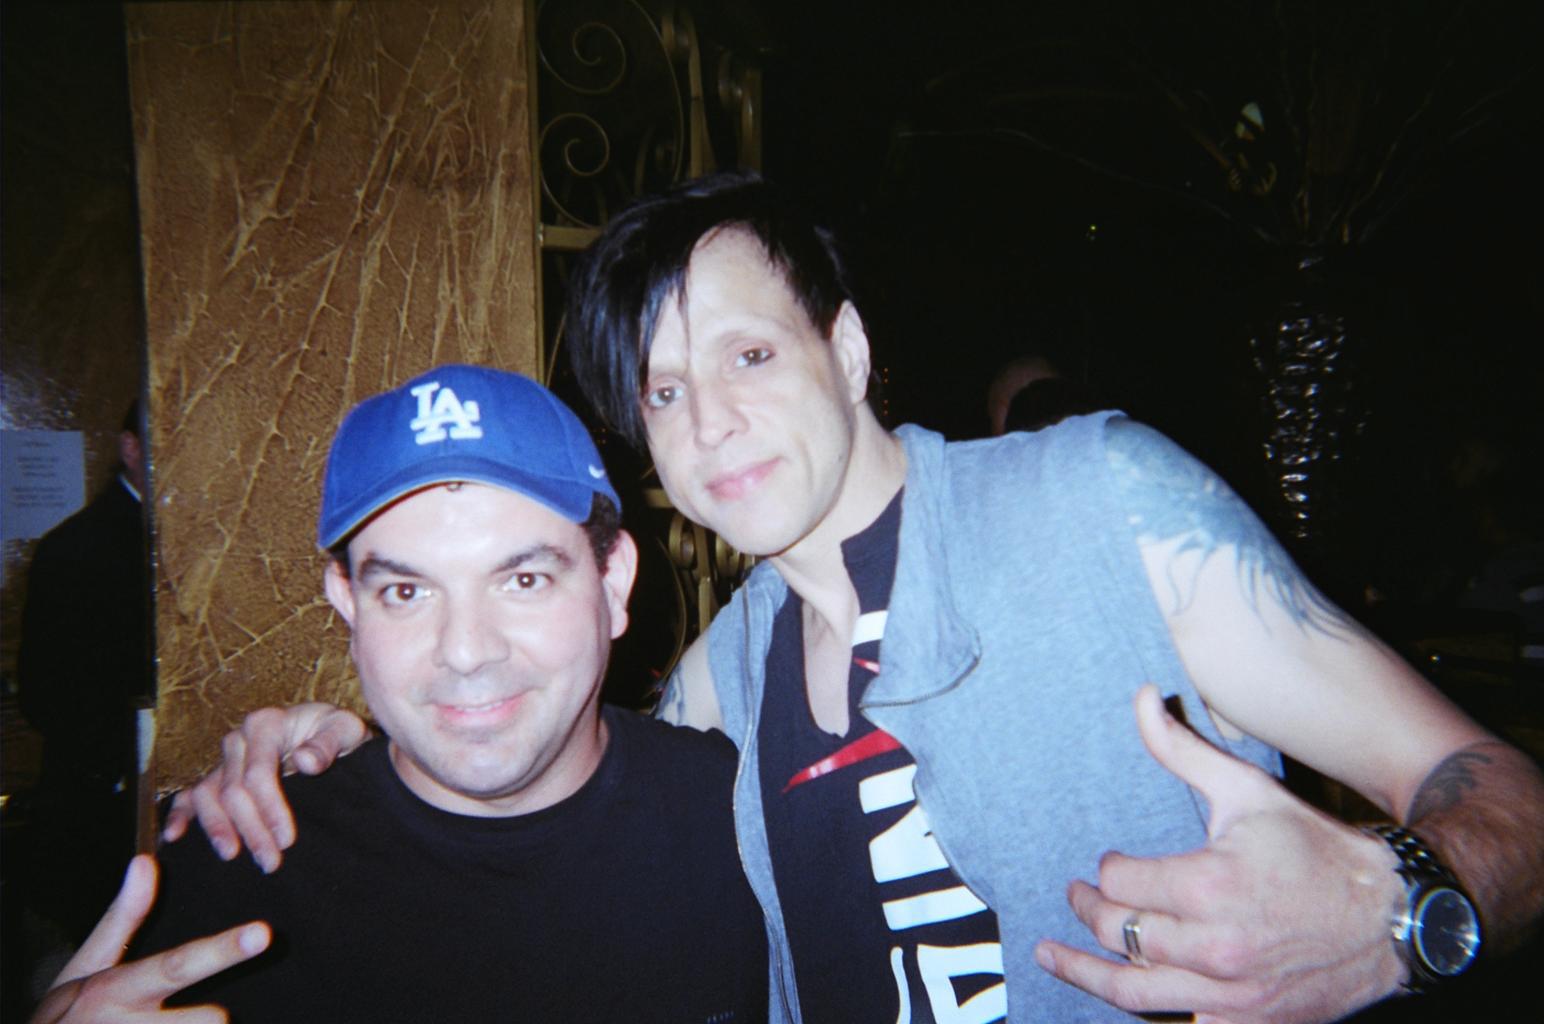 Mike Guzman and Jay Gordon from the band Orgy